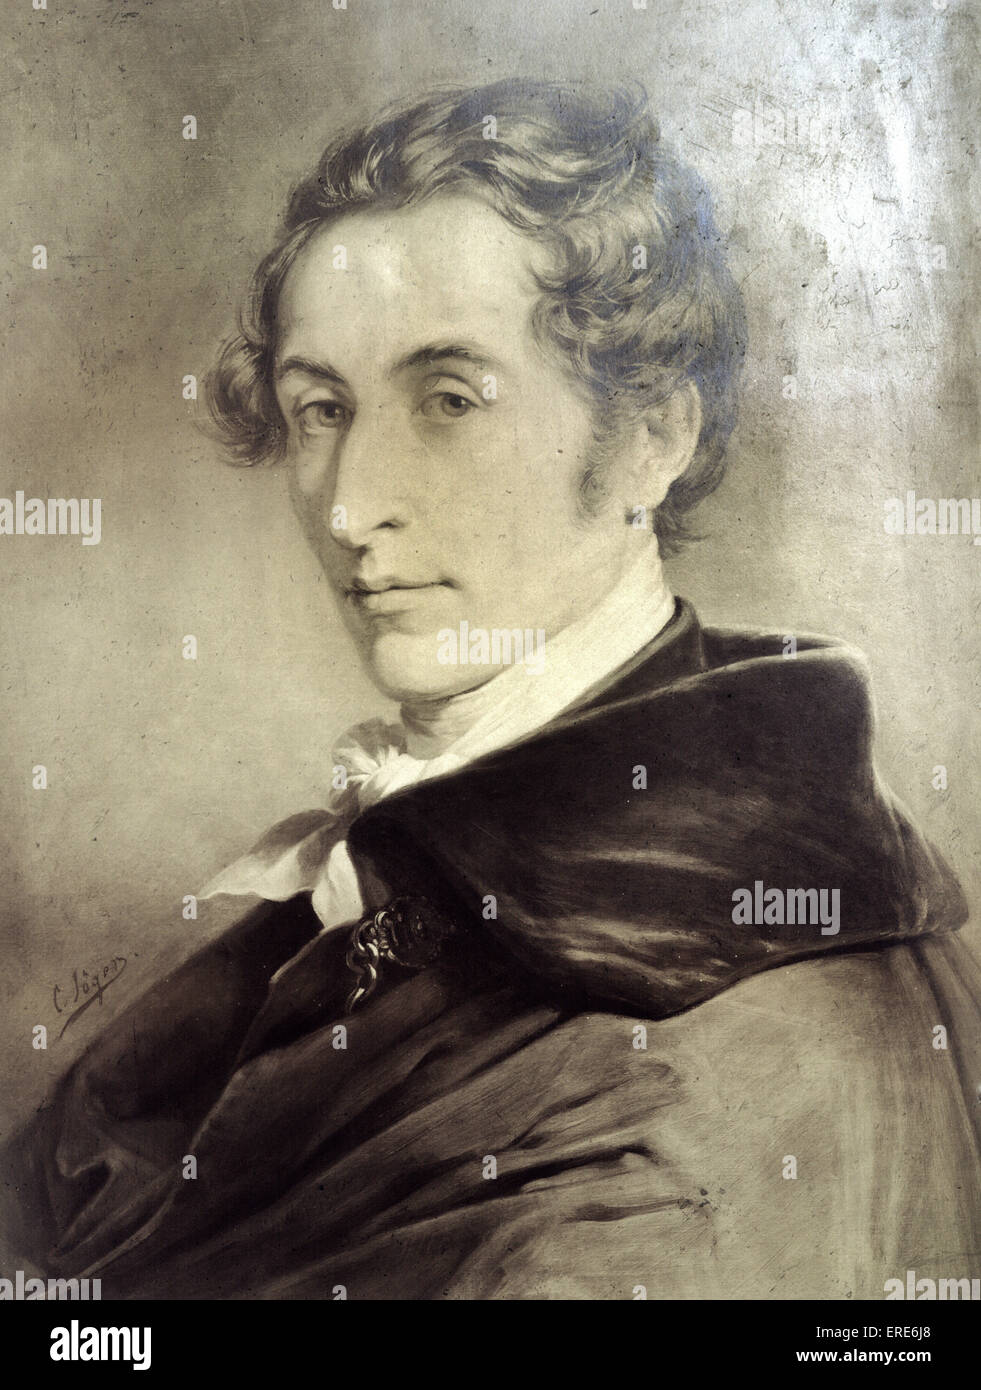 Carl Maria von Weber, composer.  Sepia photograph by Friedrich Bruckmann of painting by Carl Jäger, c.1870.  Published by Stock Photo